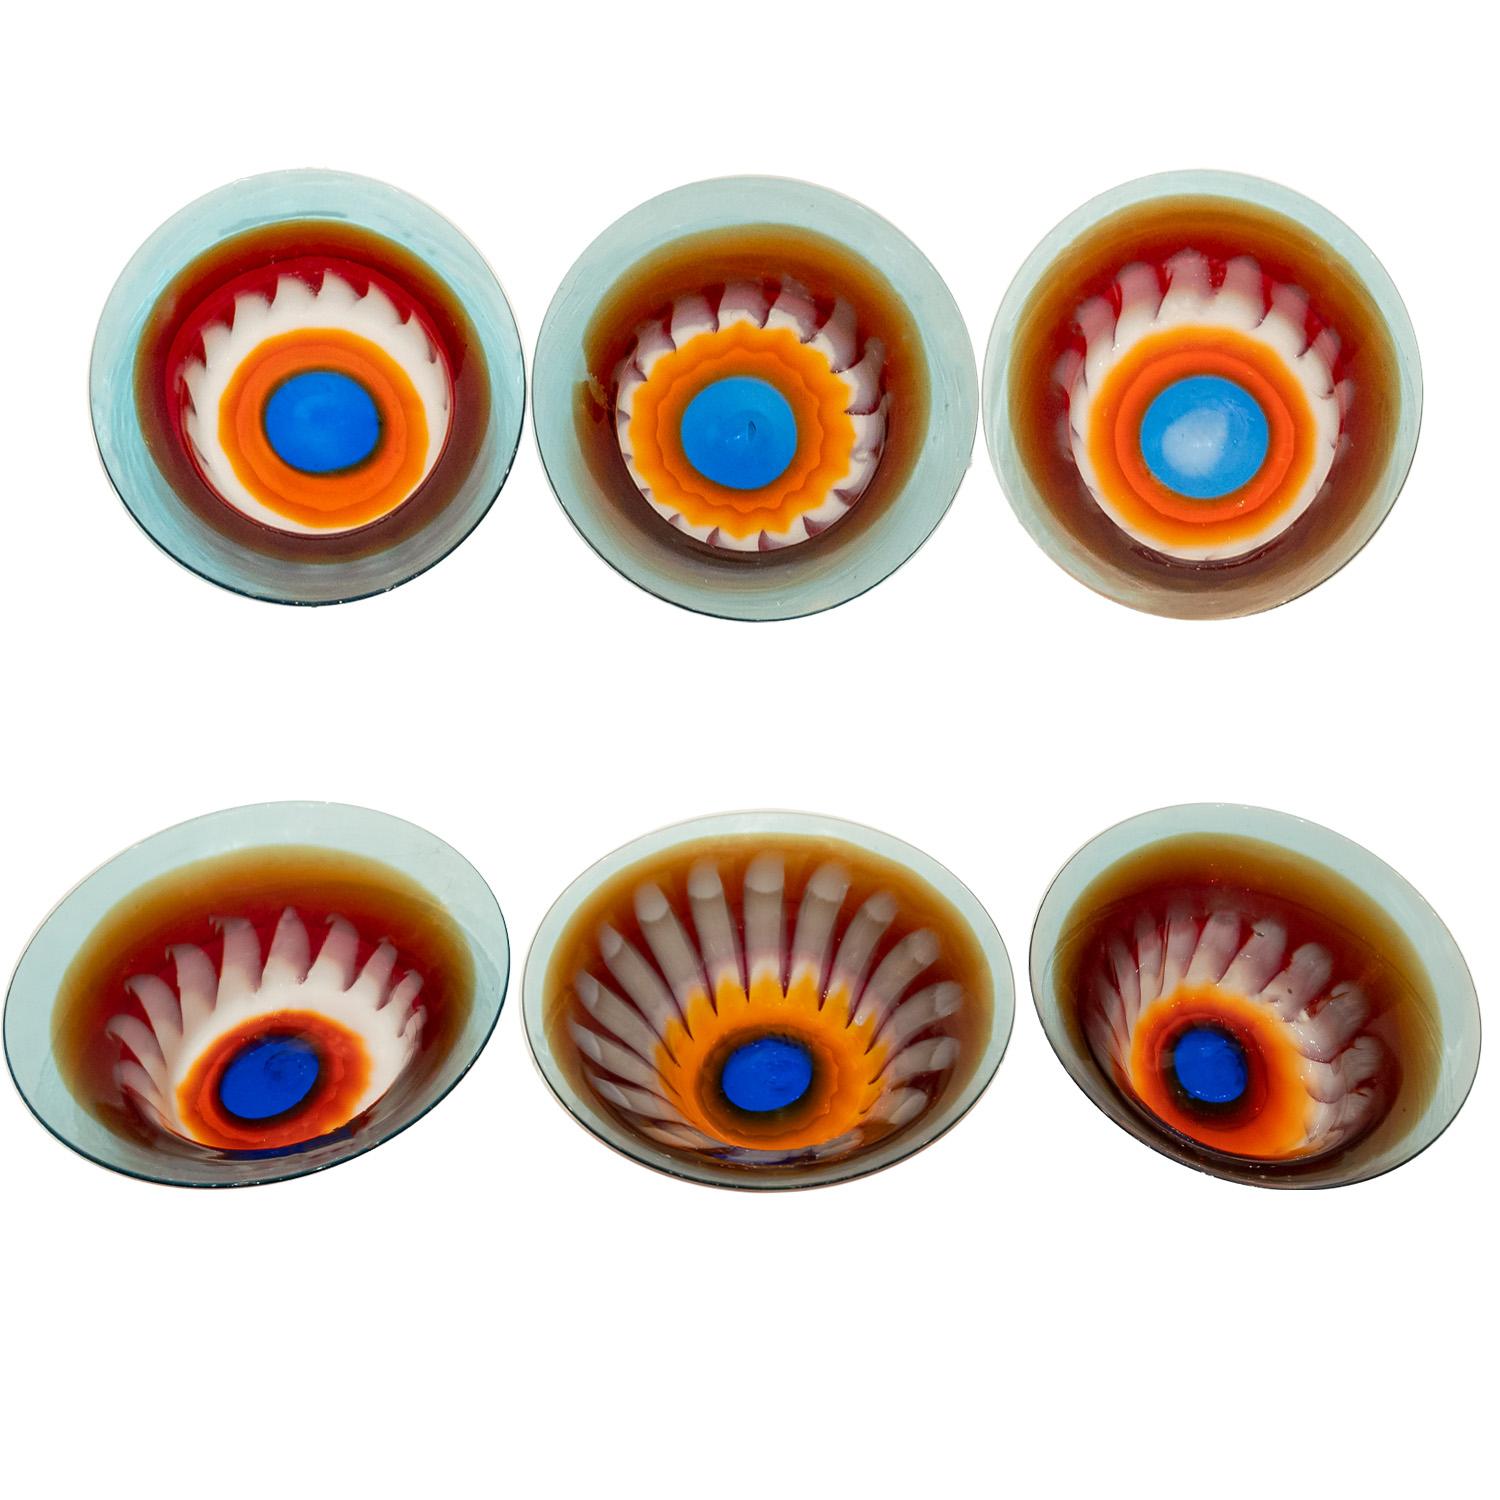 Rare set of 11 Astrale hand-blown plates/shallow bowls with unique large complex murrhine at bottom by Anzolo Fuga for Arte Vetraria Muranese (A.V.E.M.), Italy early-1960's. This set includes 6 plates and 4 shallow bowls and 1 smaller plate that